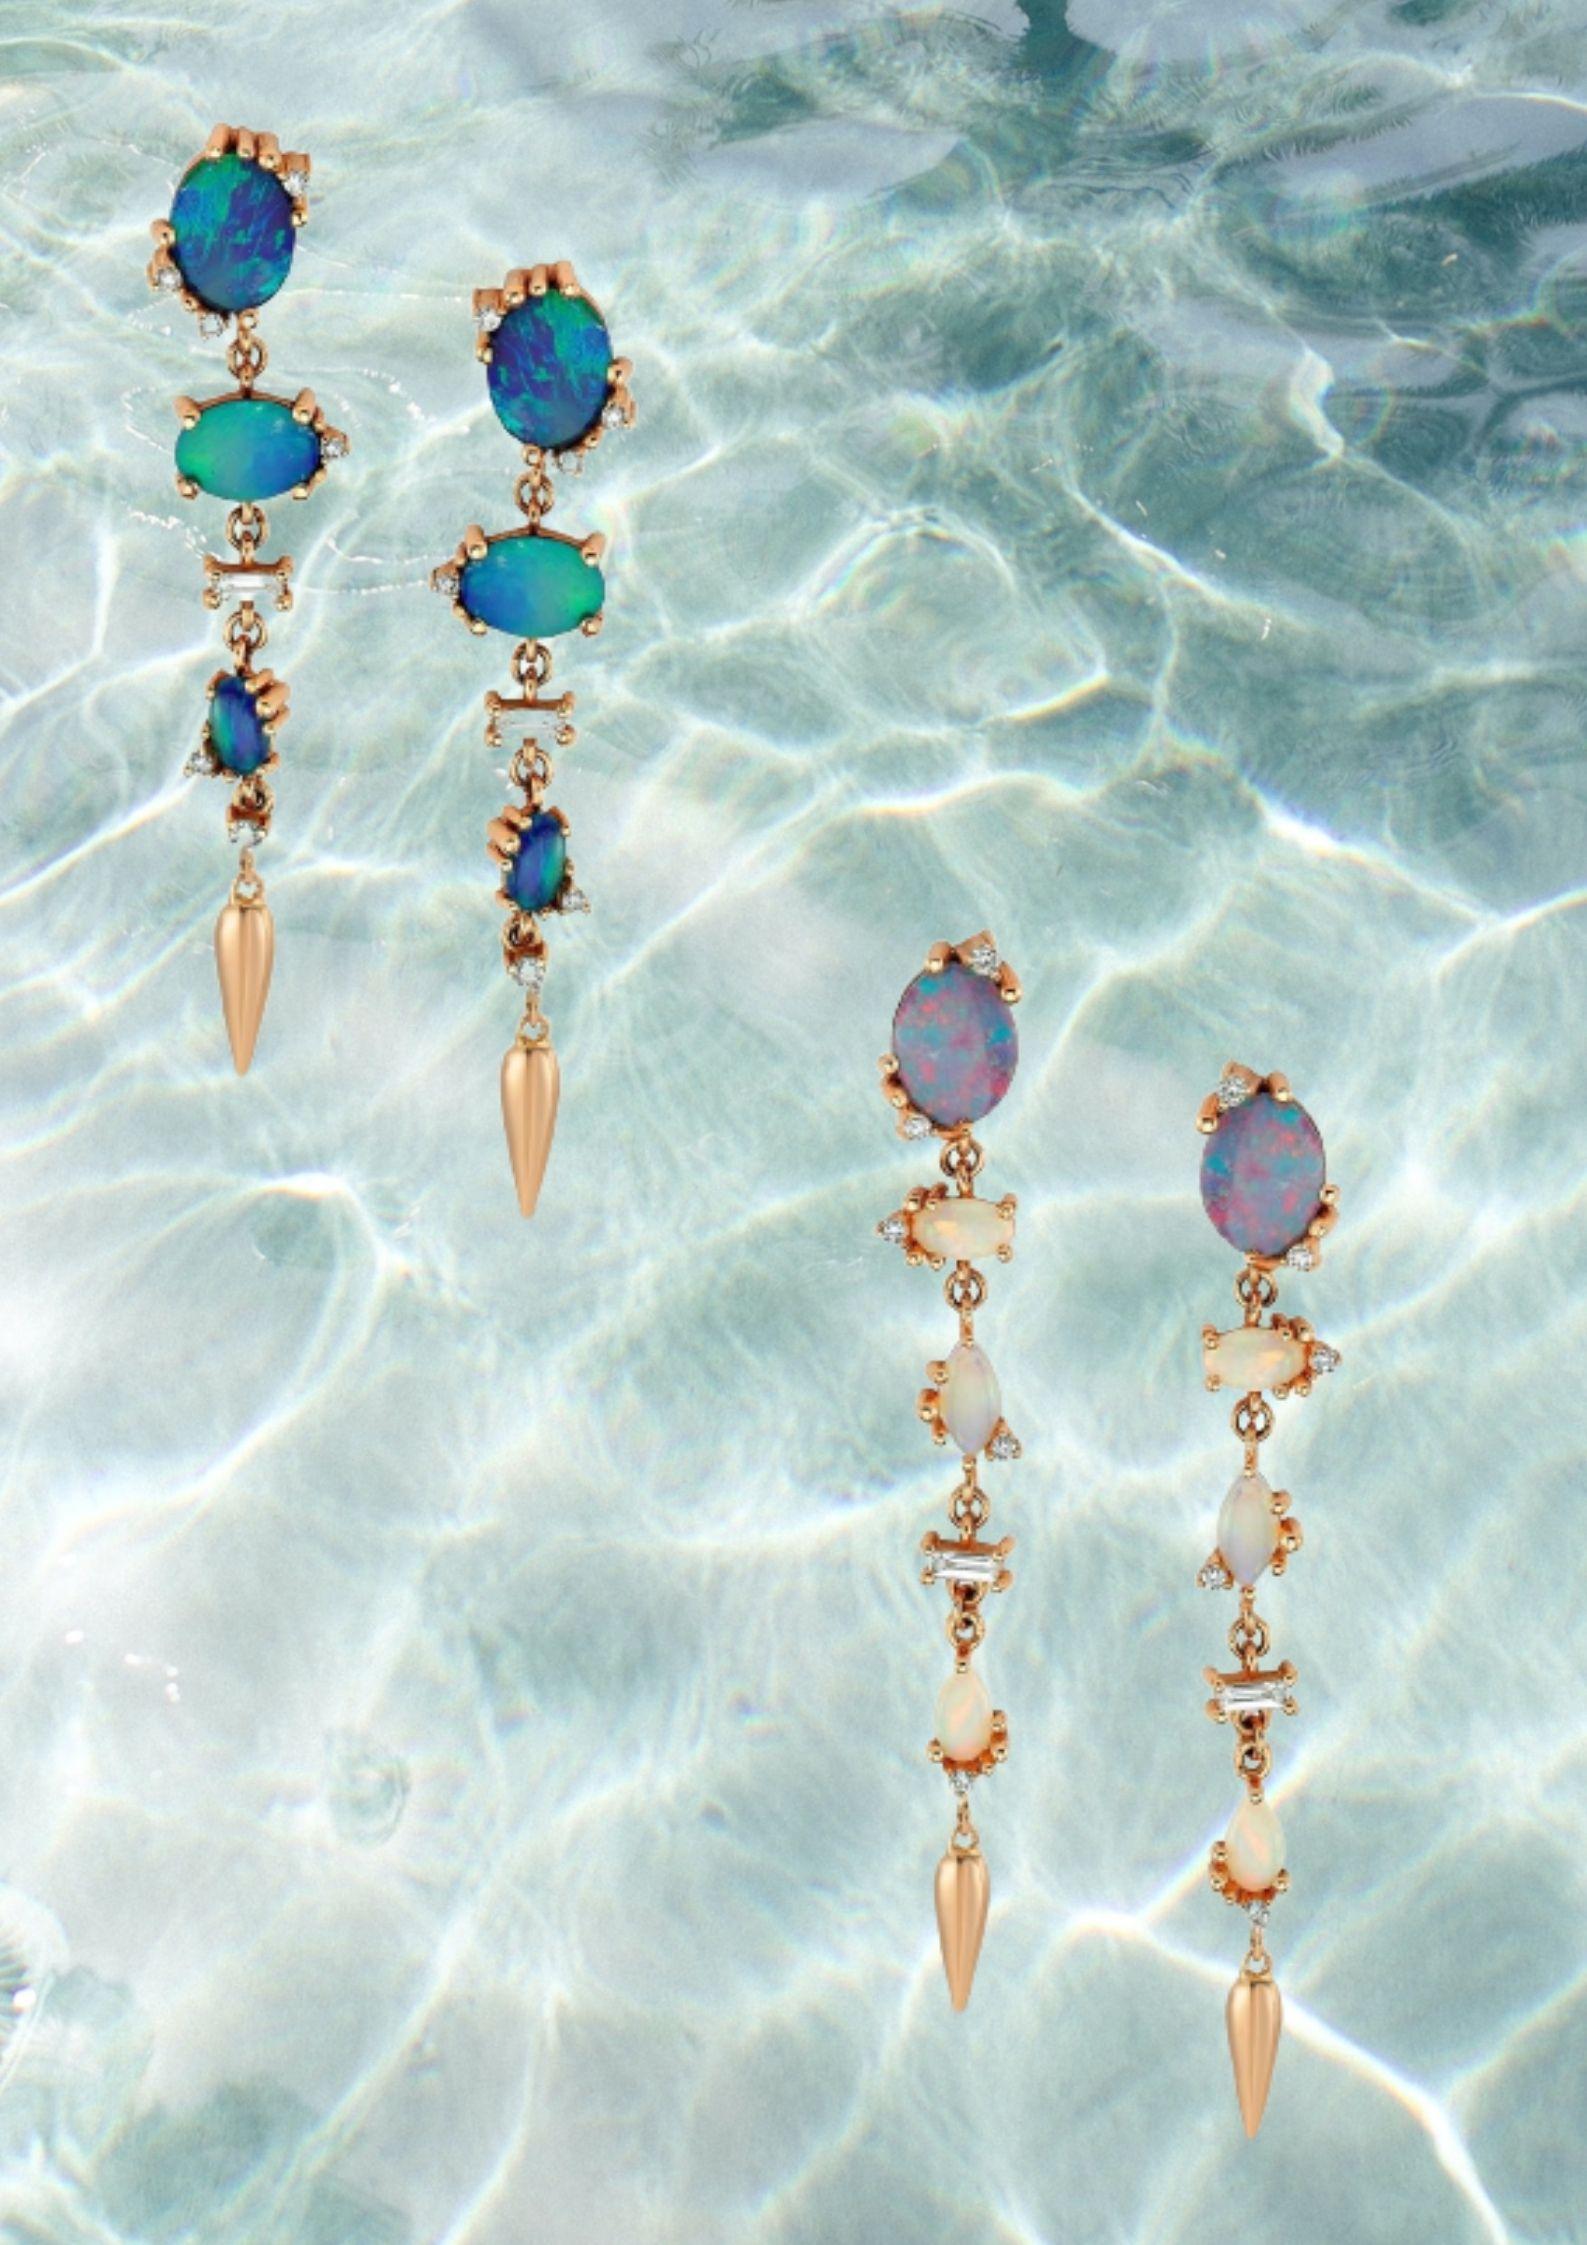 The Treasures of The Sea Collection is inspired by the water element which represents the treasures and natural stones hidden in the depths of the sea.

Olina dangle earrings with 14k rose gold and diamonds by Selda Jewellery

Additional